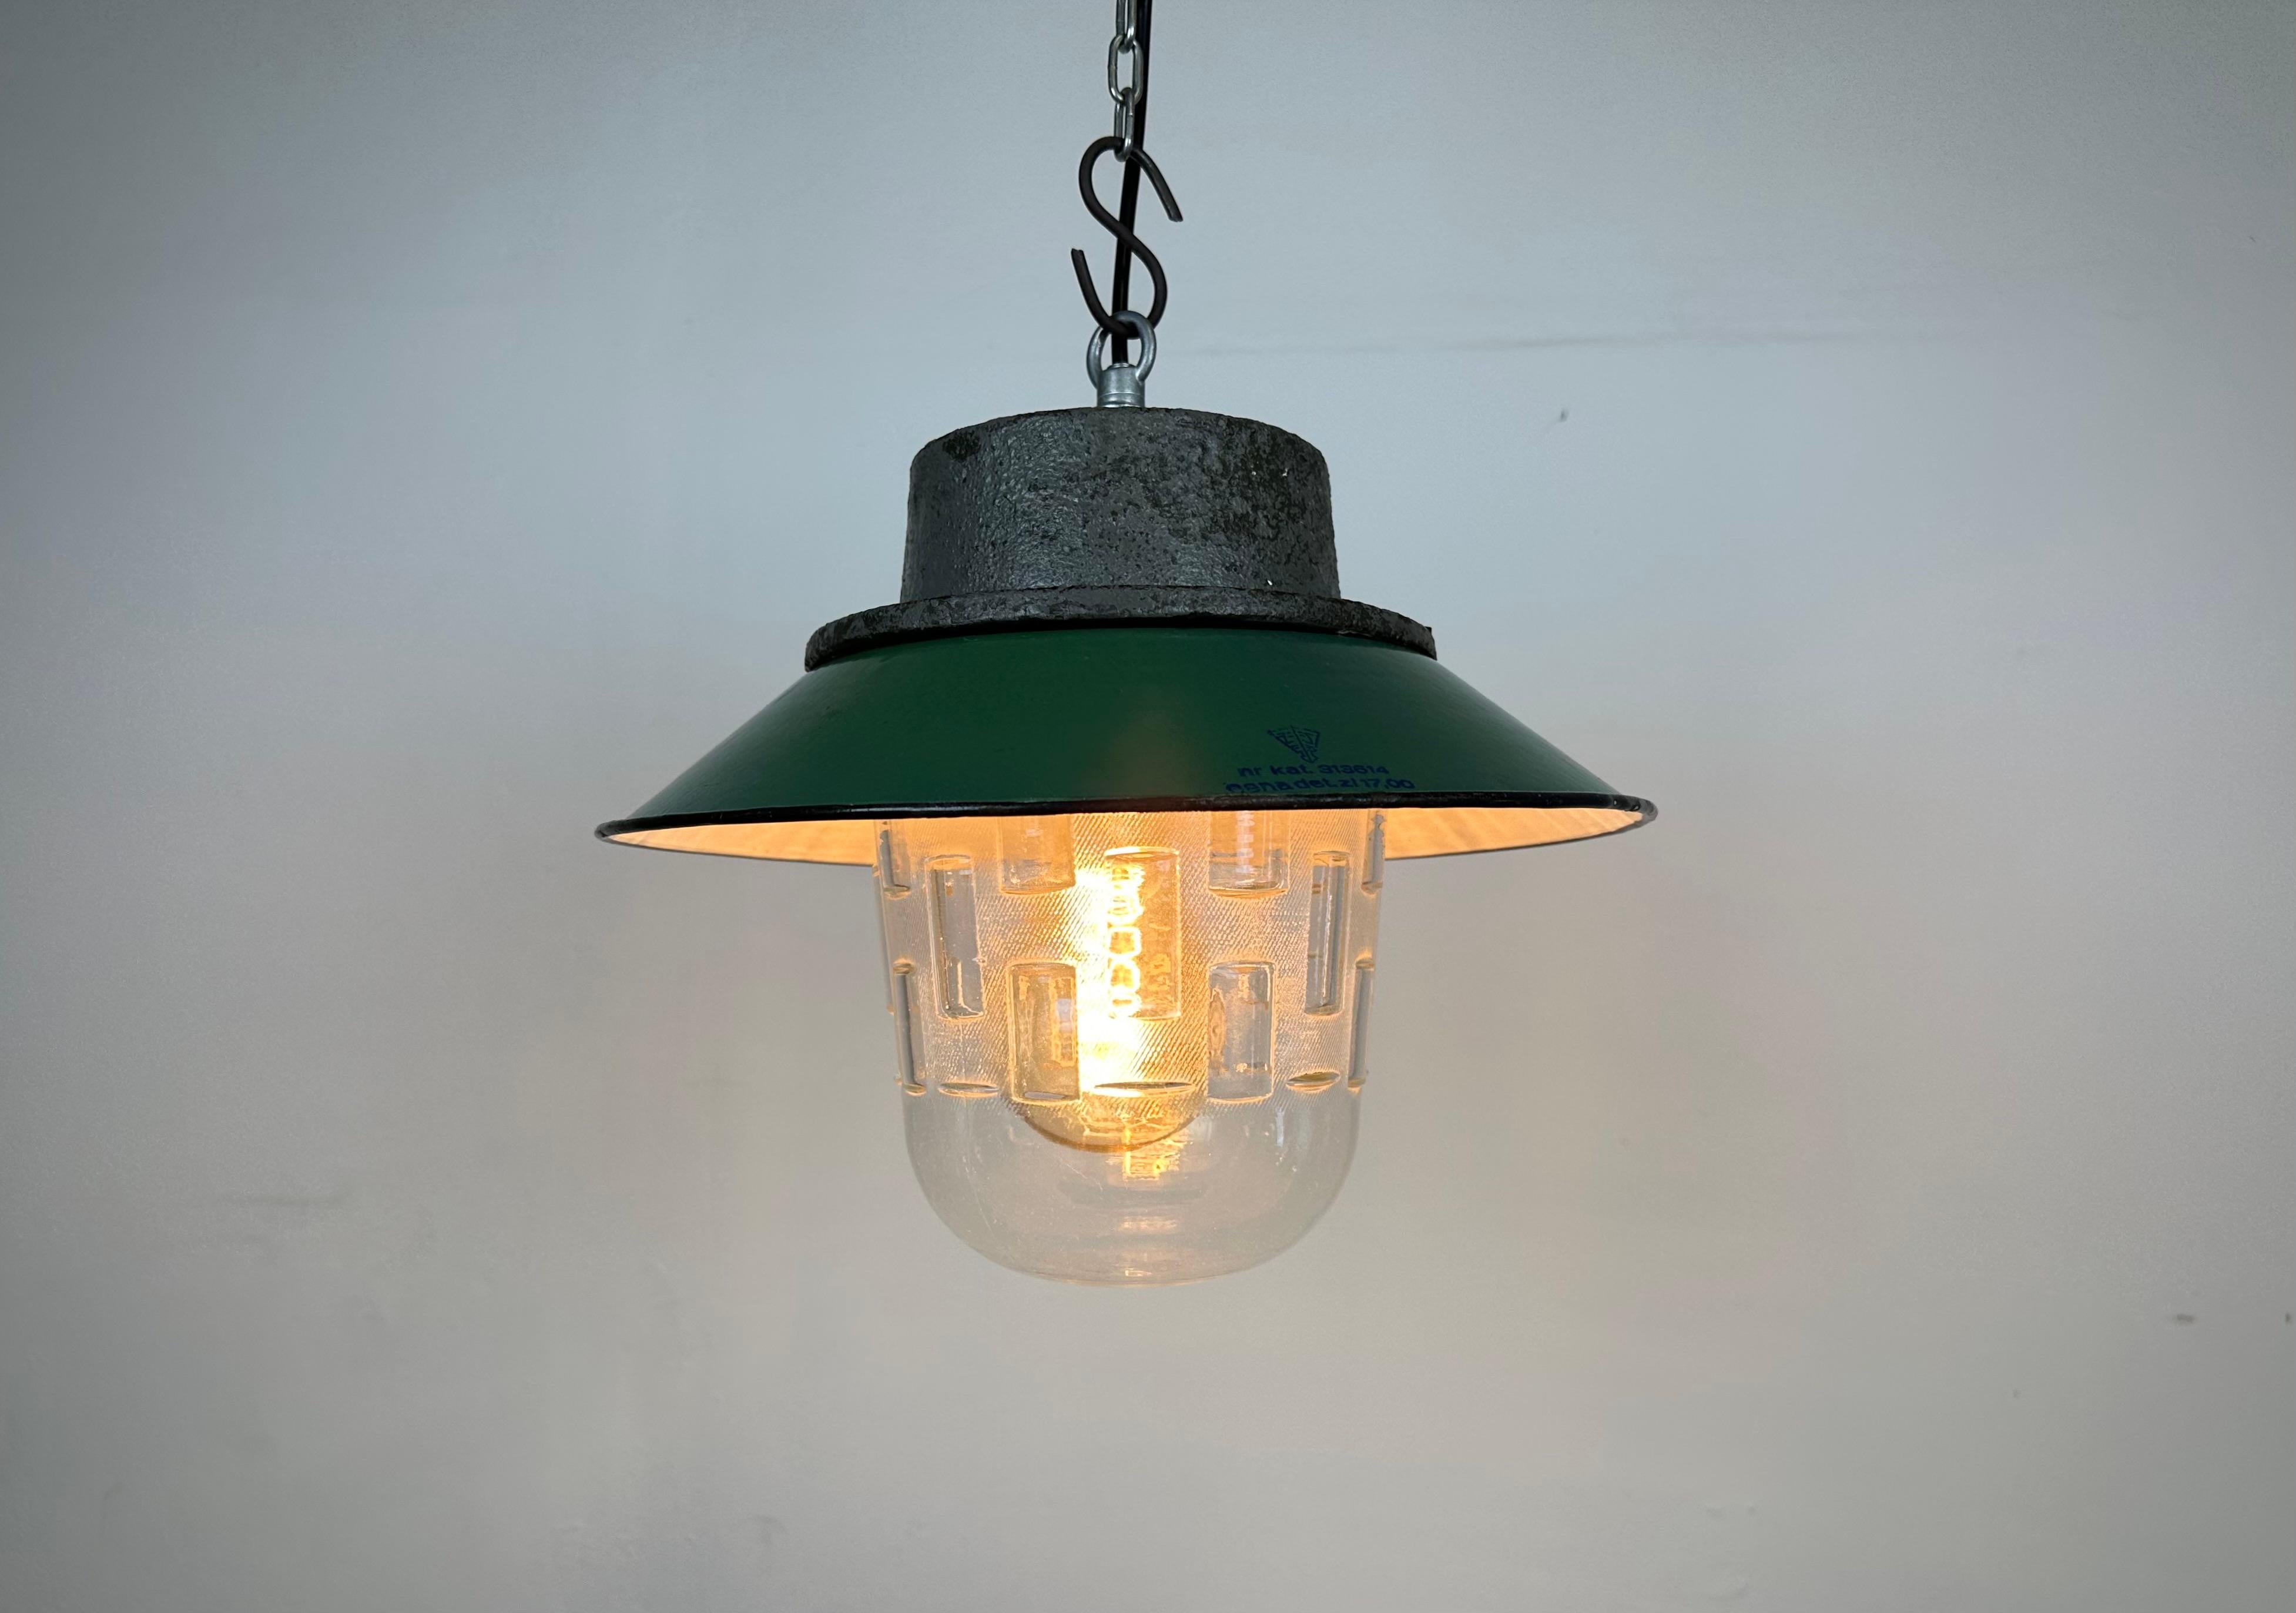 Green Enamel and Cast Iron Industrial Pendant Light, 1960s For Sale 3